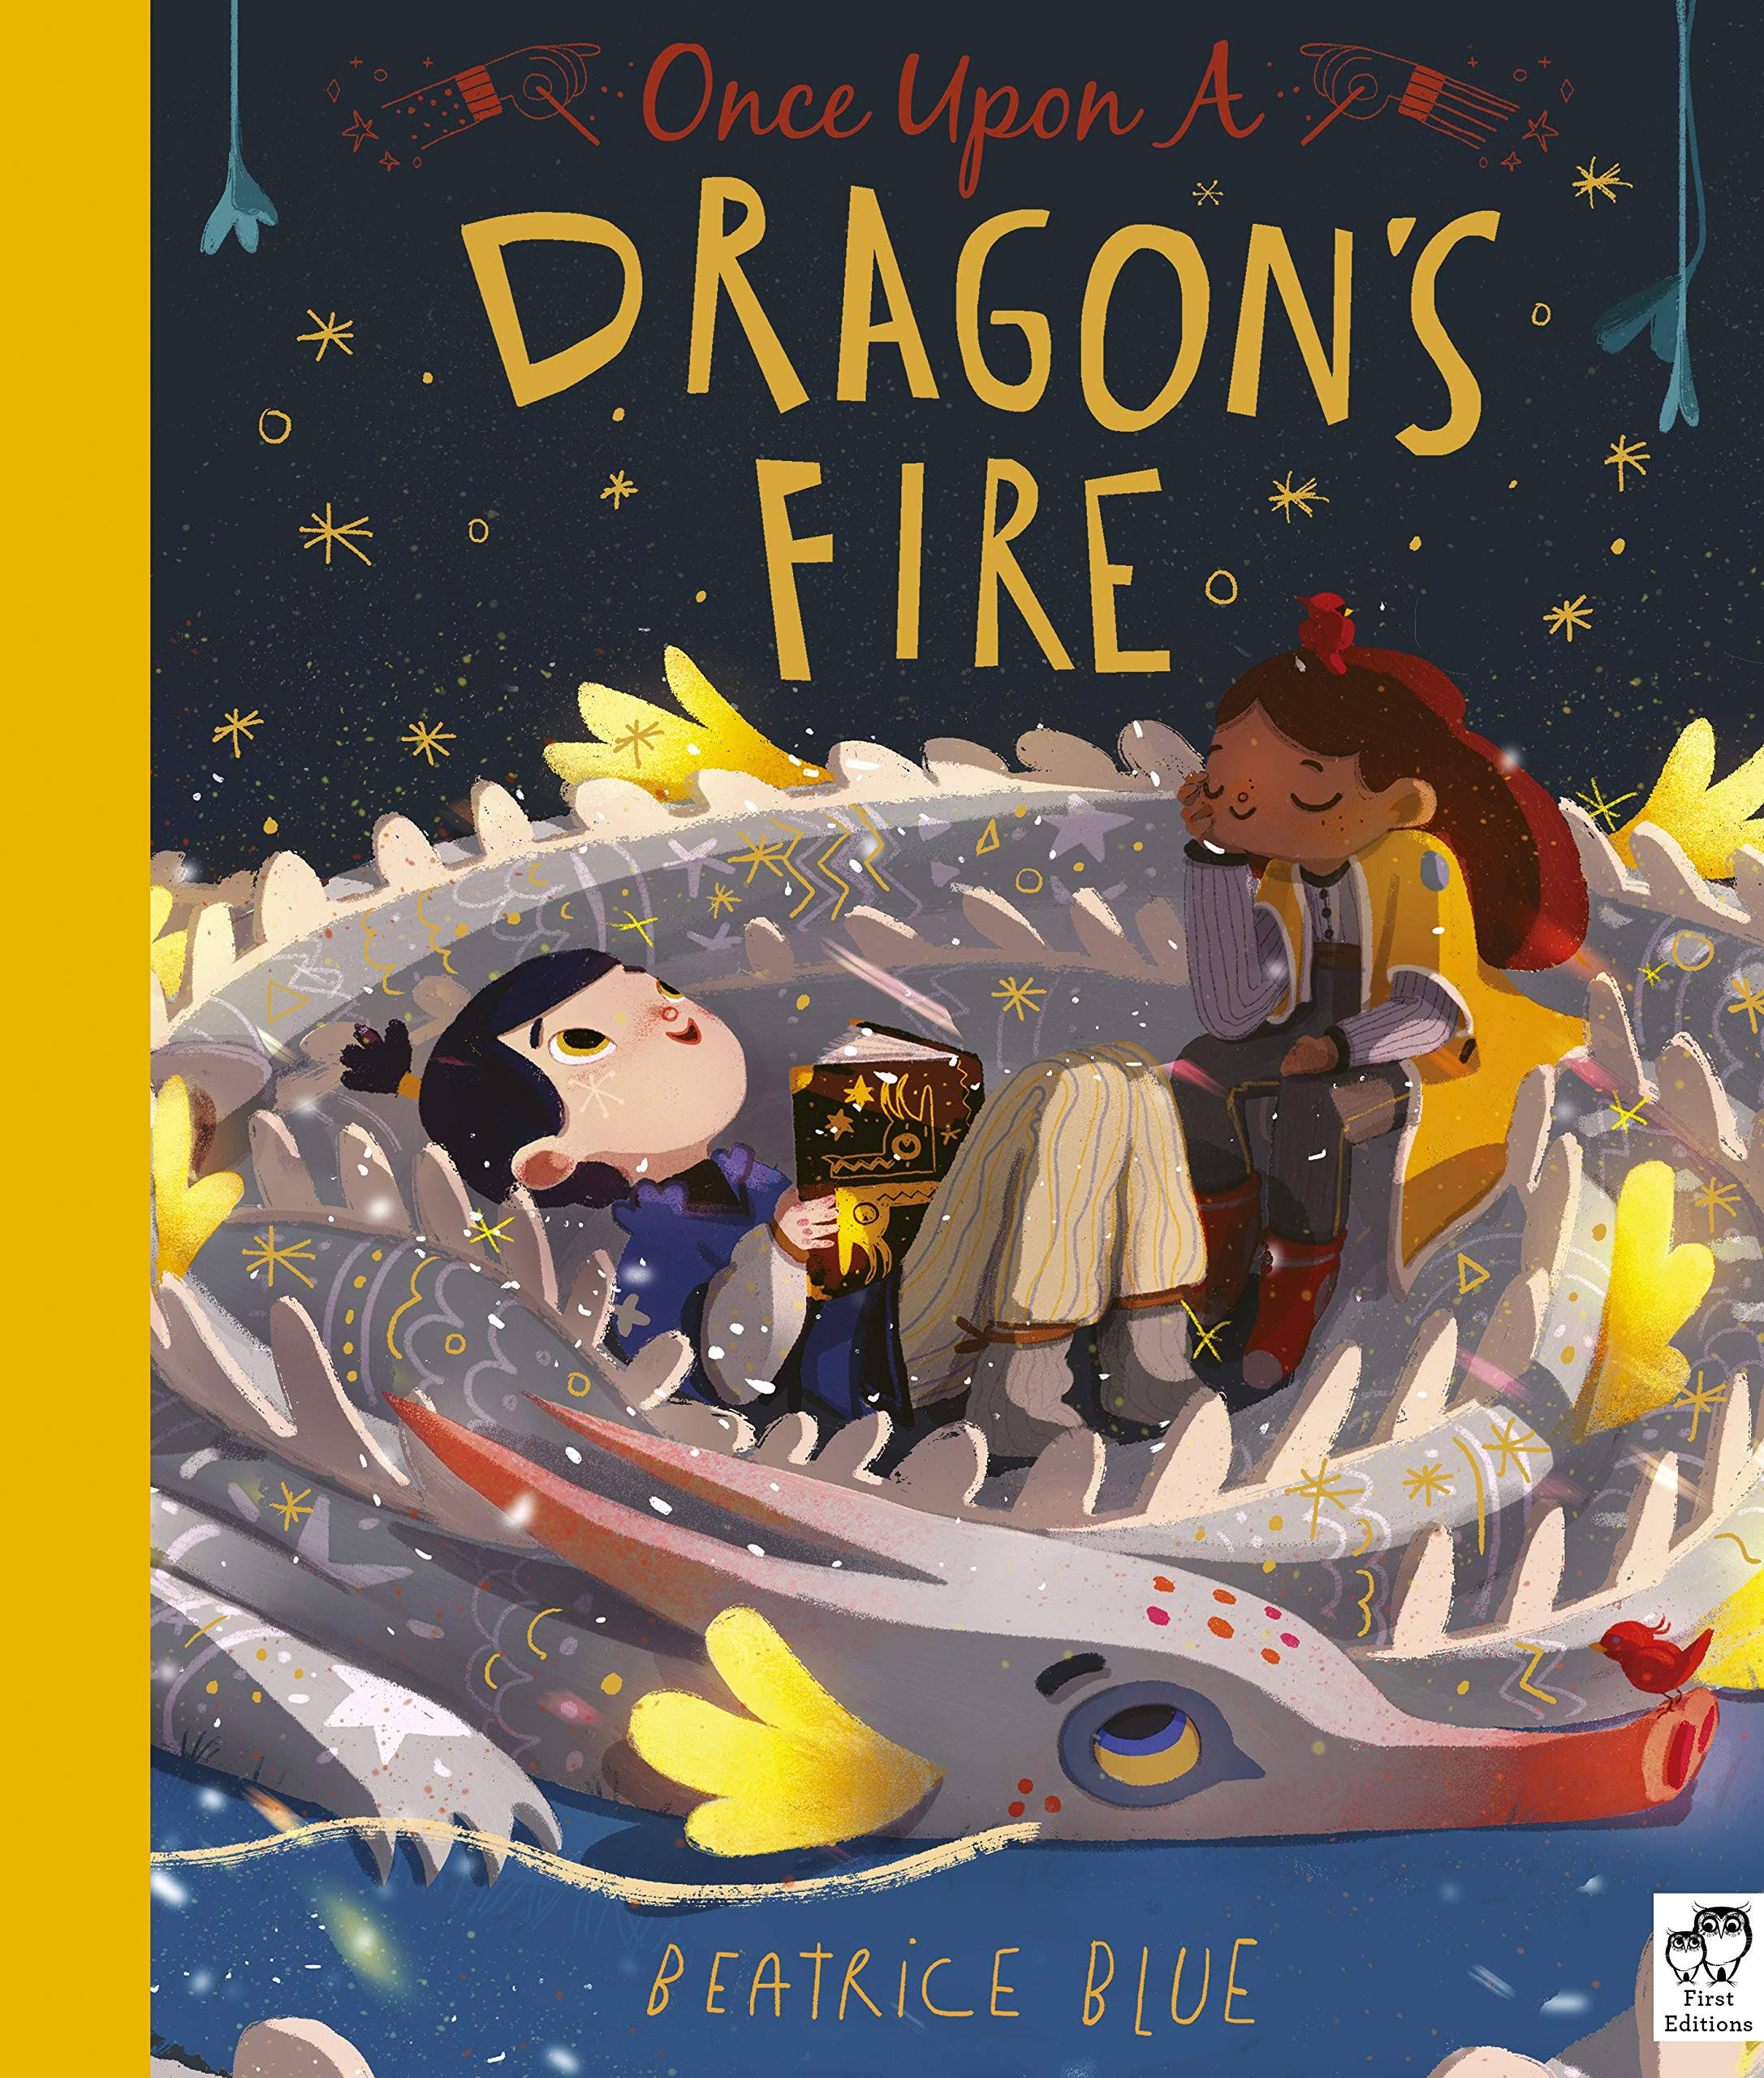 Once Upon a Dragon's Fire [Book]